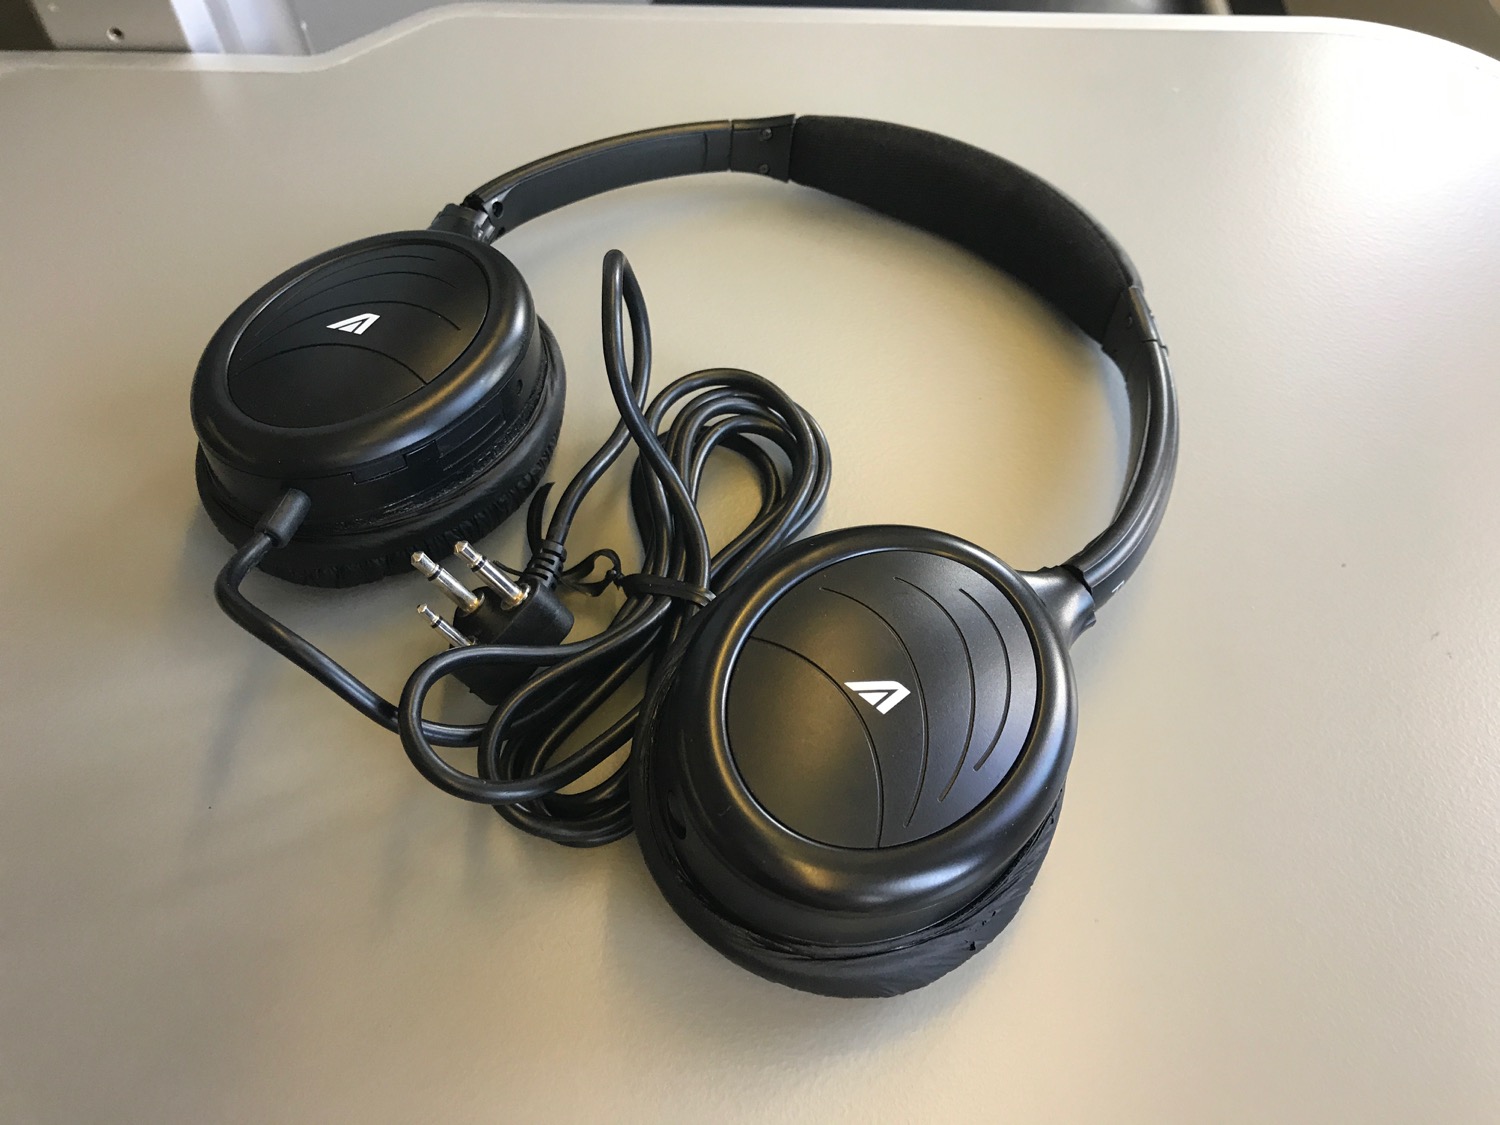 a pair of black headphones with wires